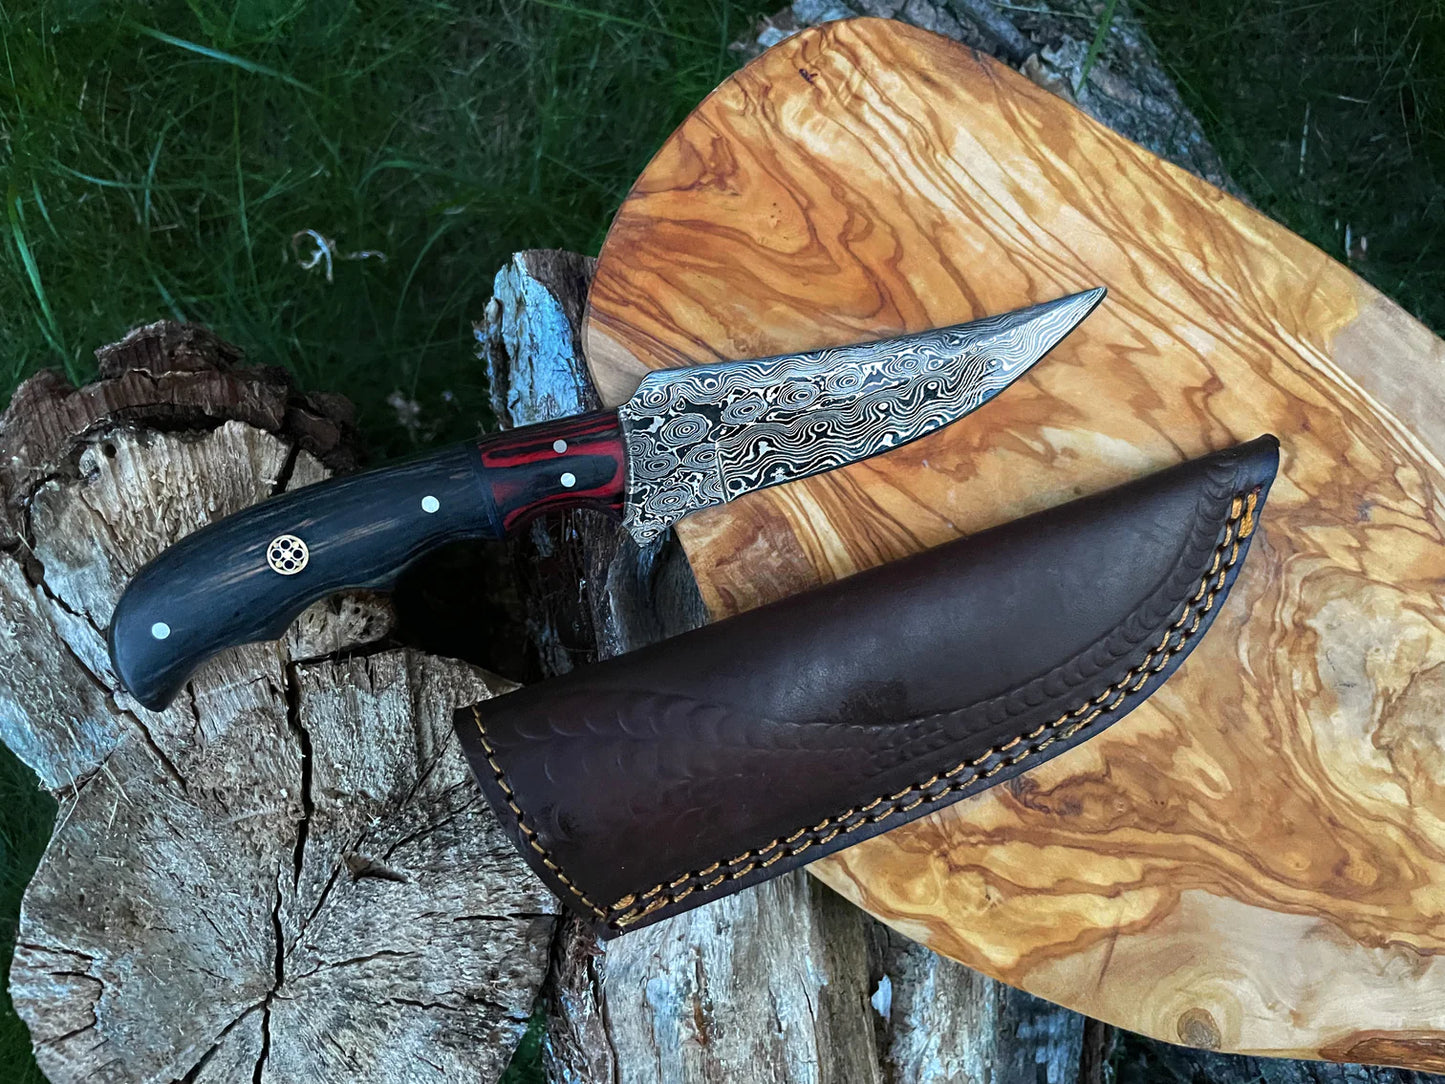 DAMASCUS STEEL HUNTING KNIFE BLADE WITH DIAMOND WOOD SCALES